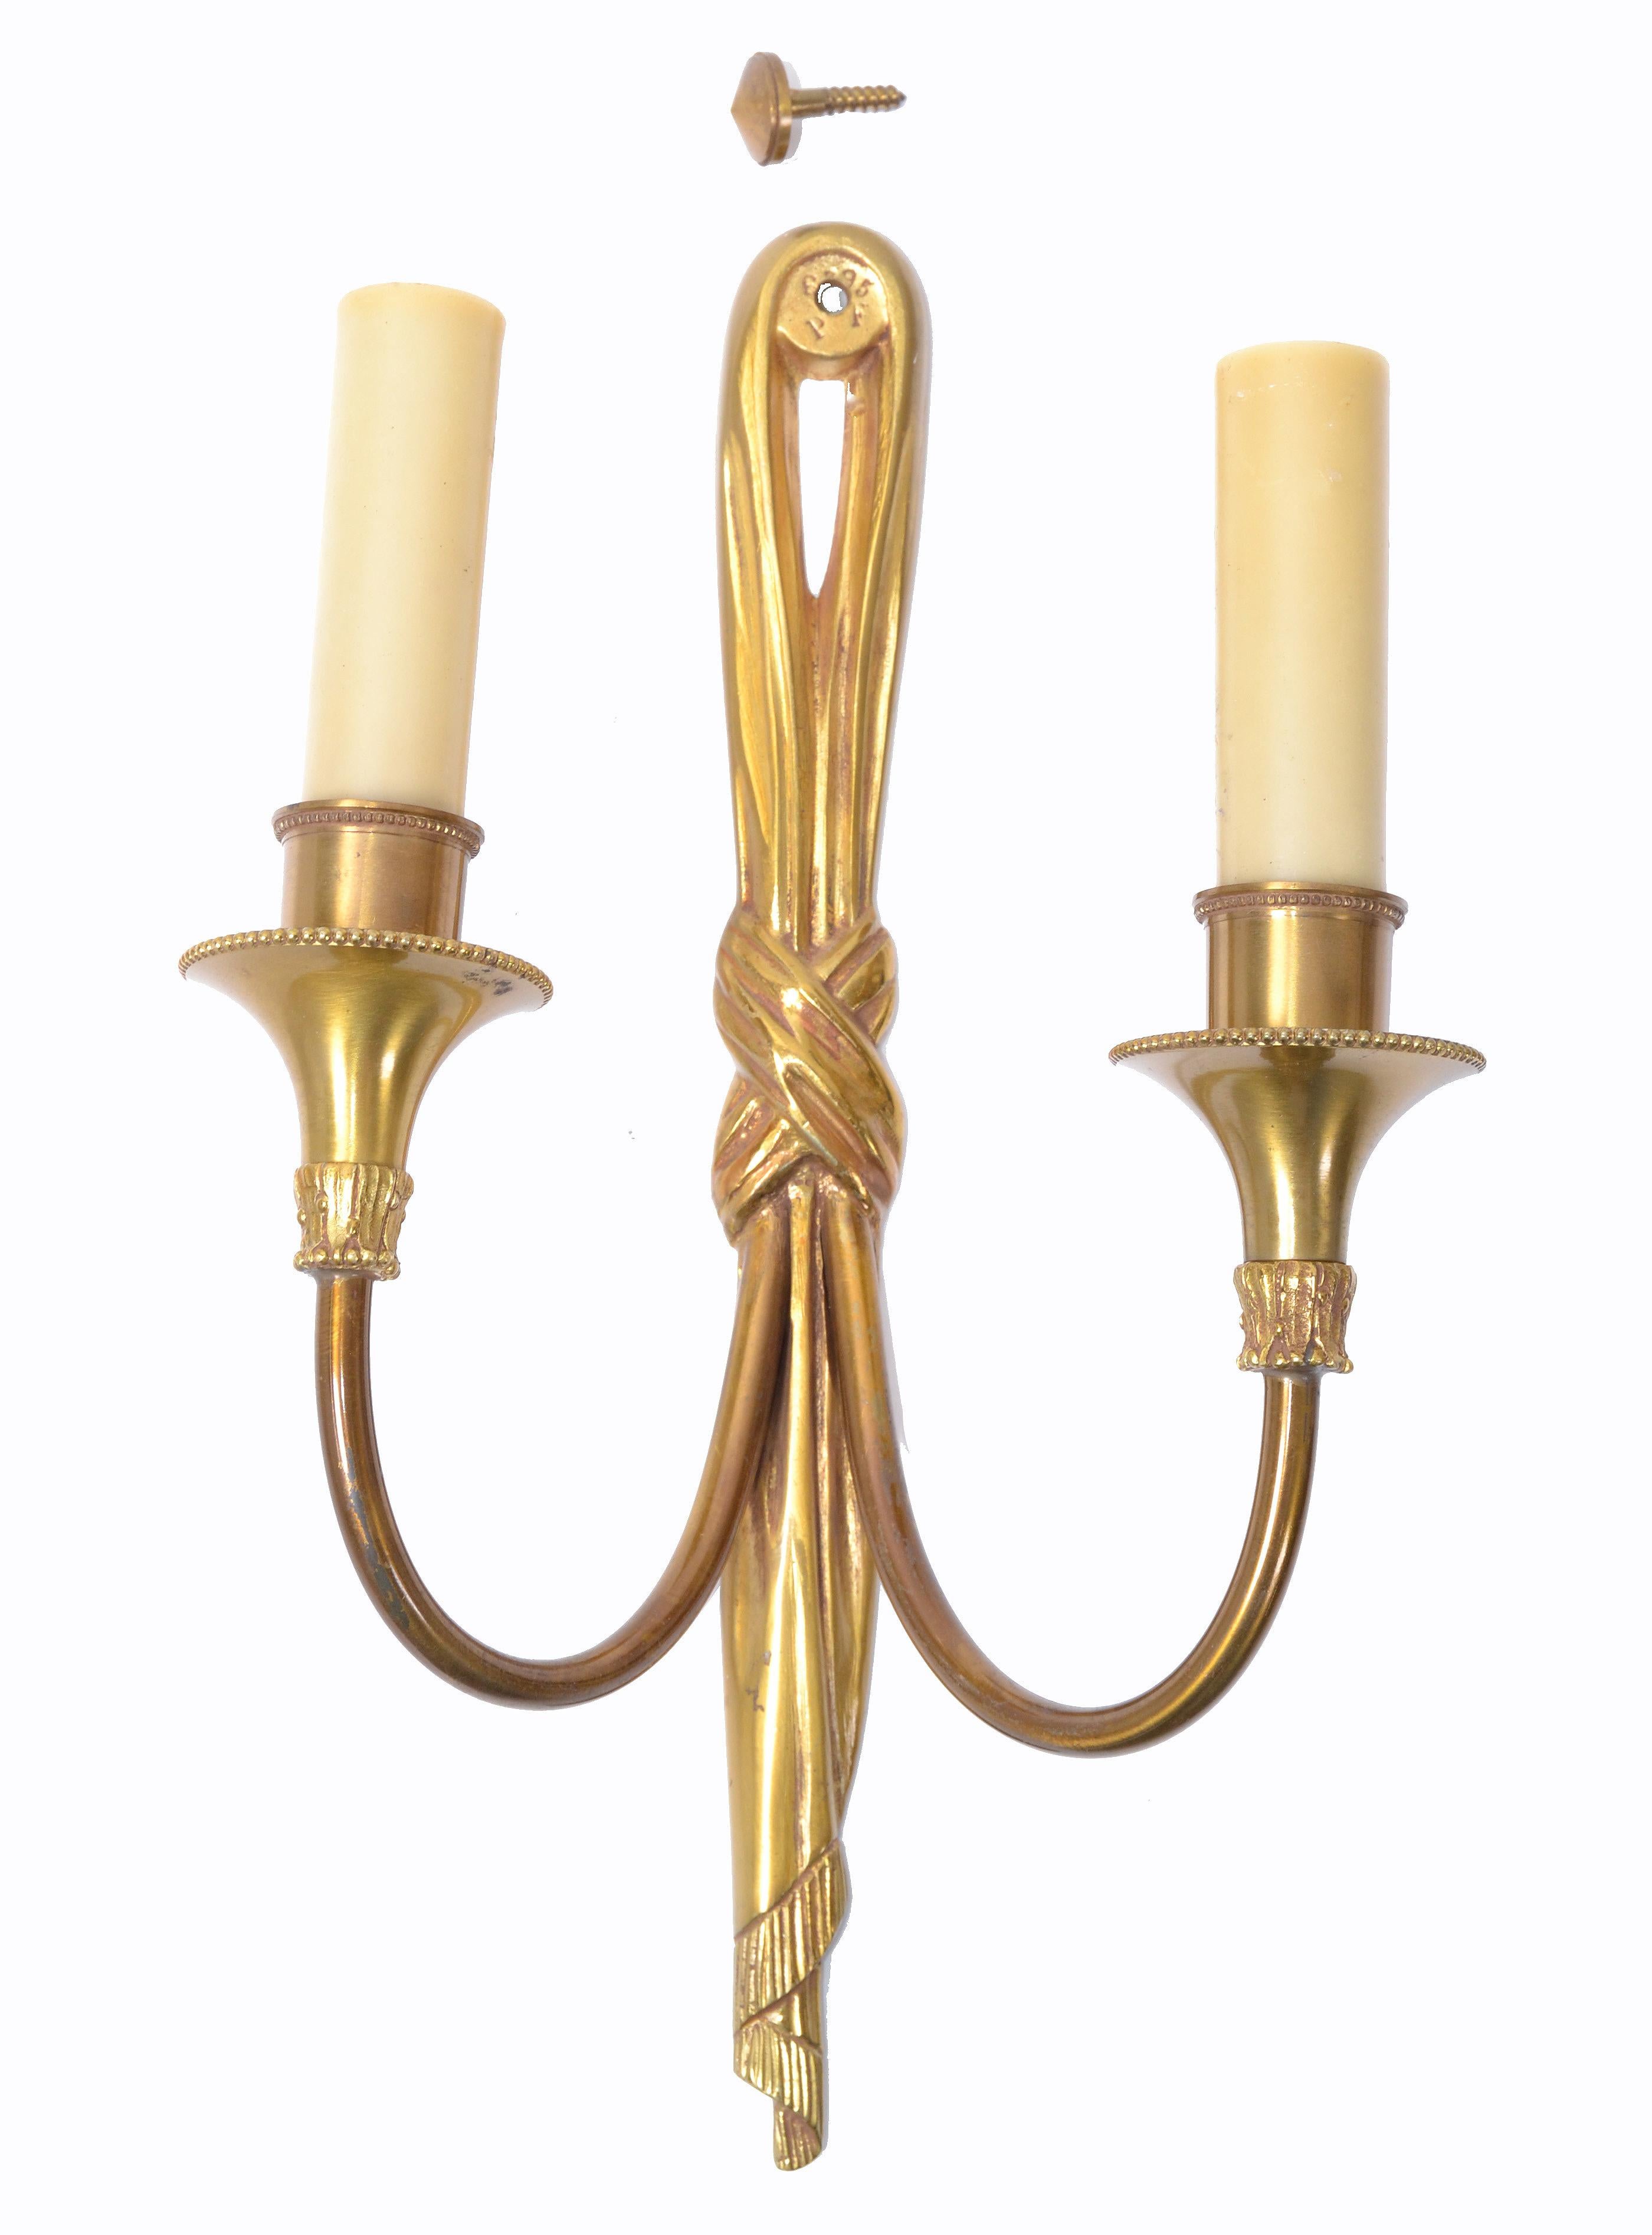 20th Century Maison Charles French Bronze Drapes Sconces France 1950s, 2 Pair Available